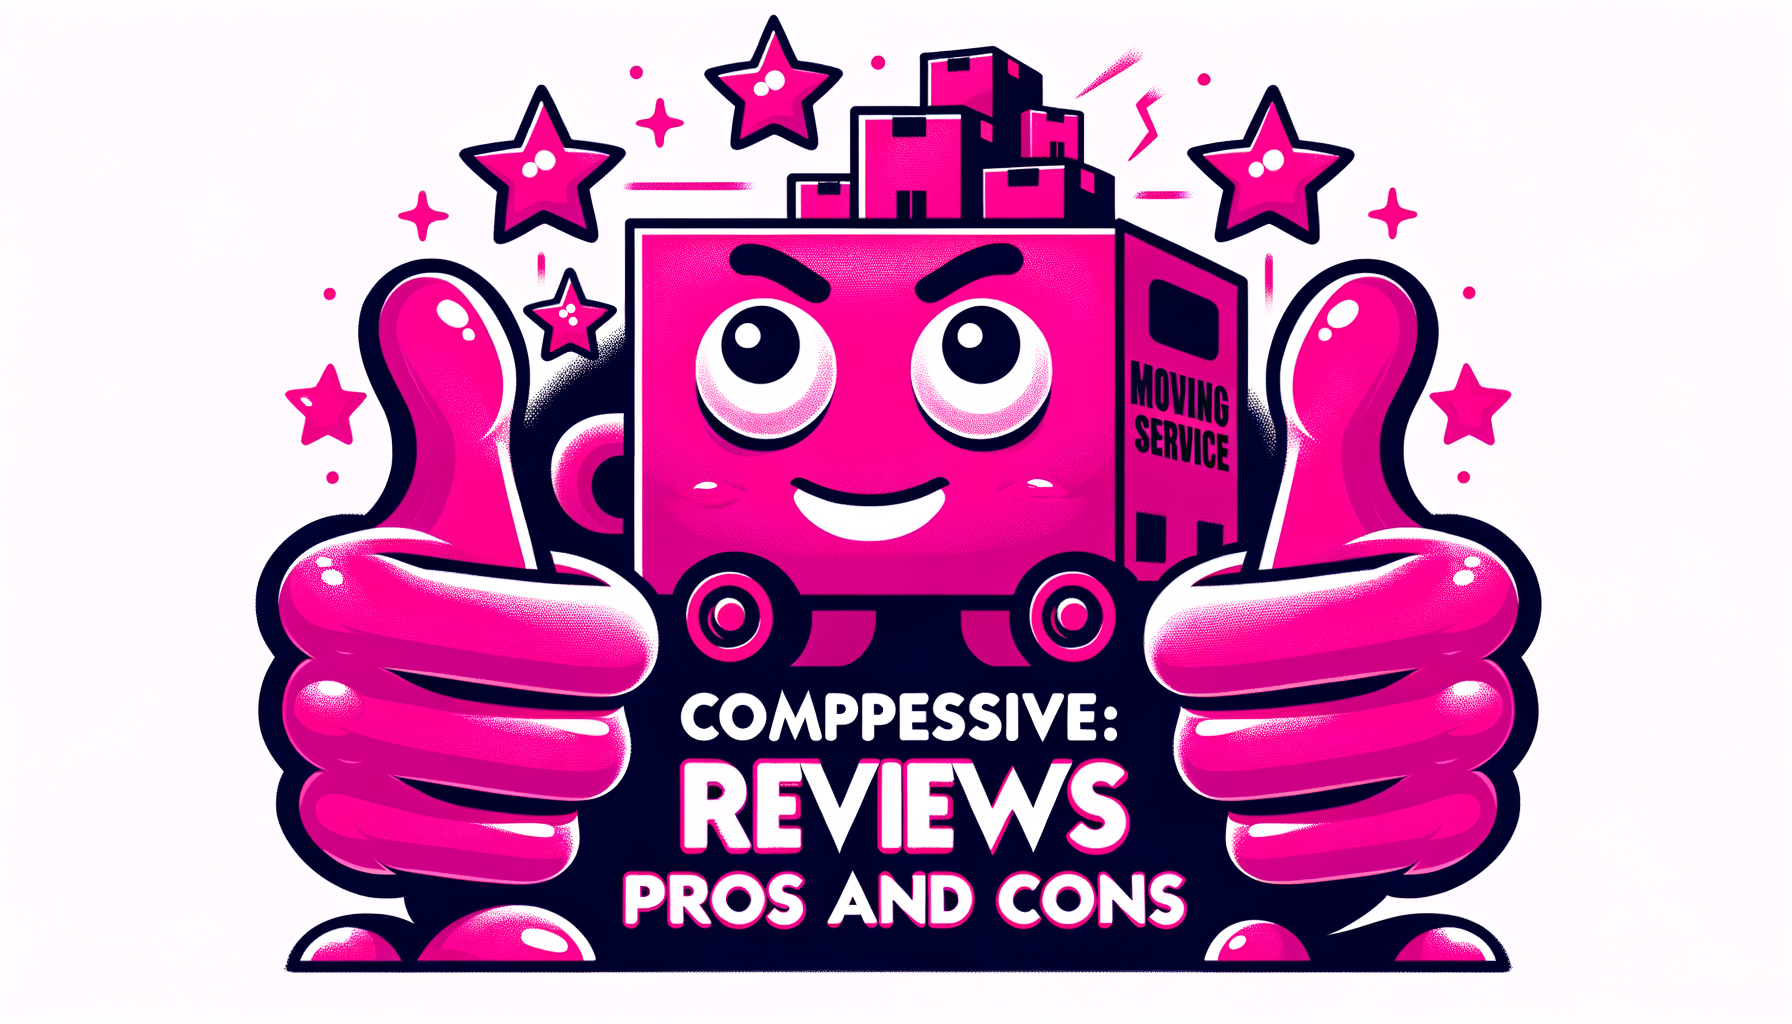 Fuschia cartoon illustration showcasing JK Moving Services with symbols of thumbs up and thumbs down, indicating a review of their pros and cons.